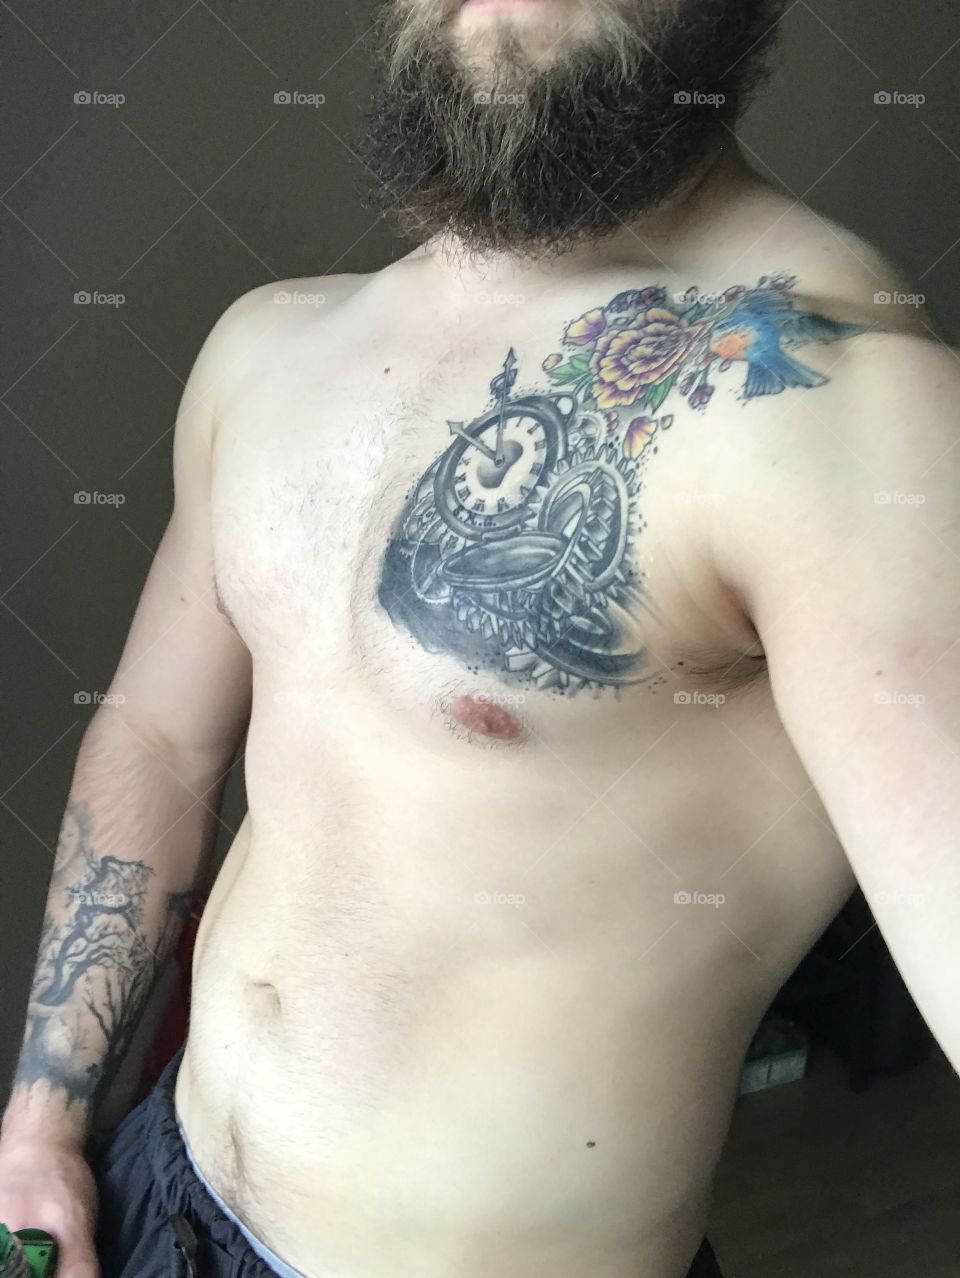 Gym body with colorful tattoos and a beard.